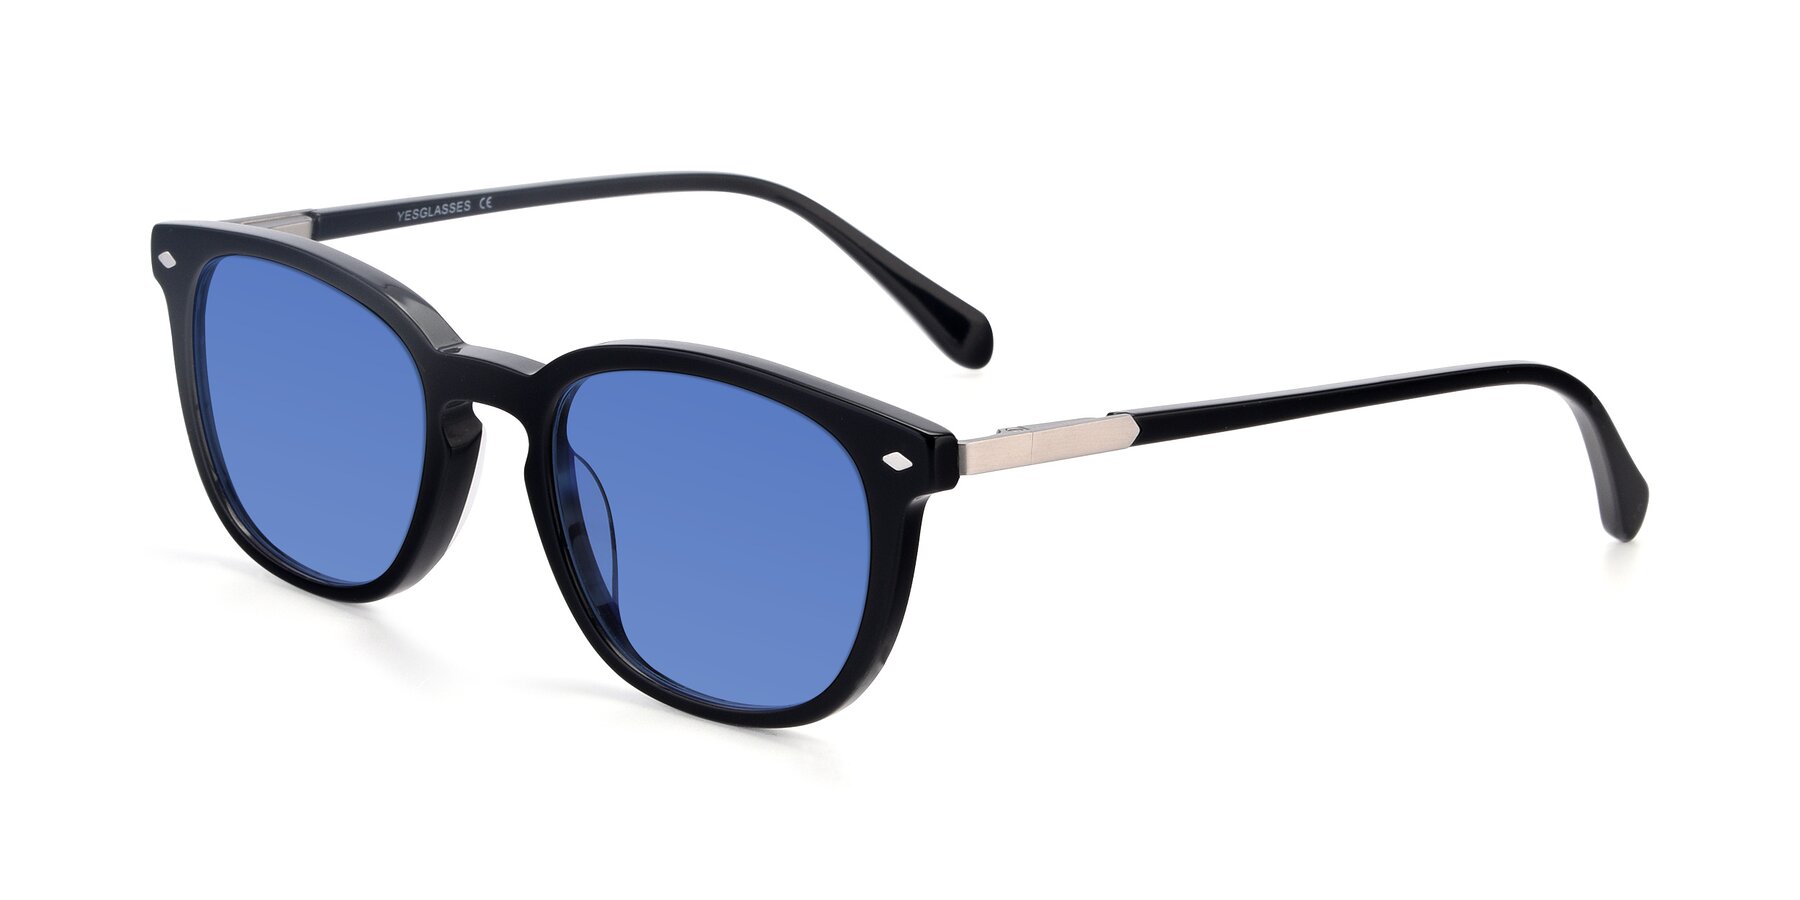 Angle of 17578 in Black with Blue Tinted Lenses